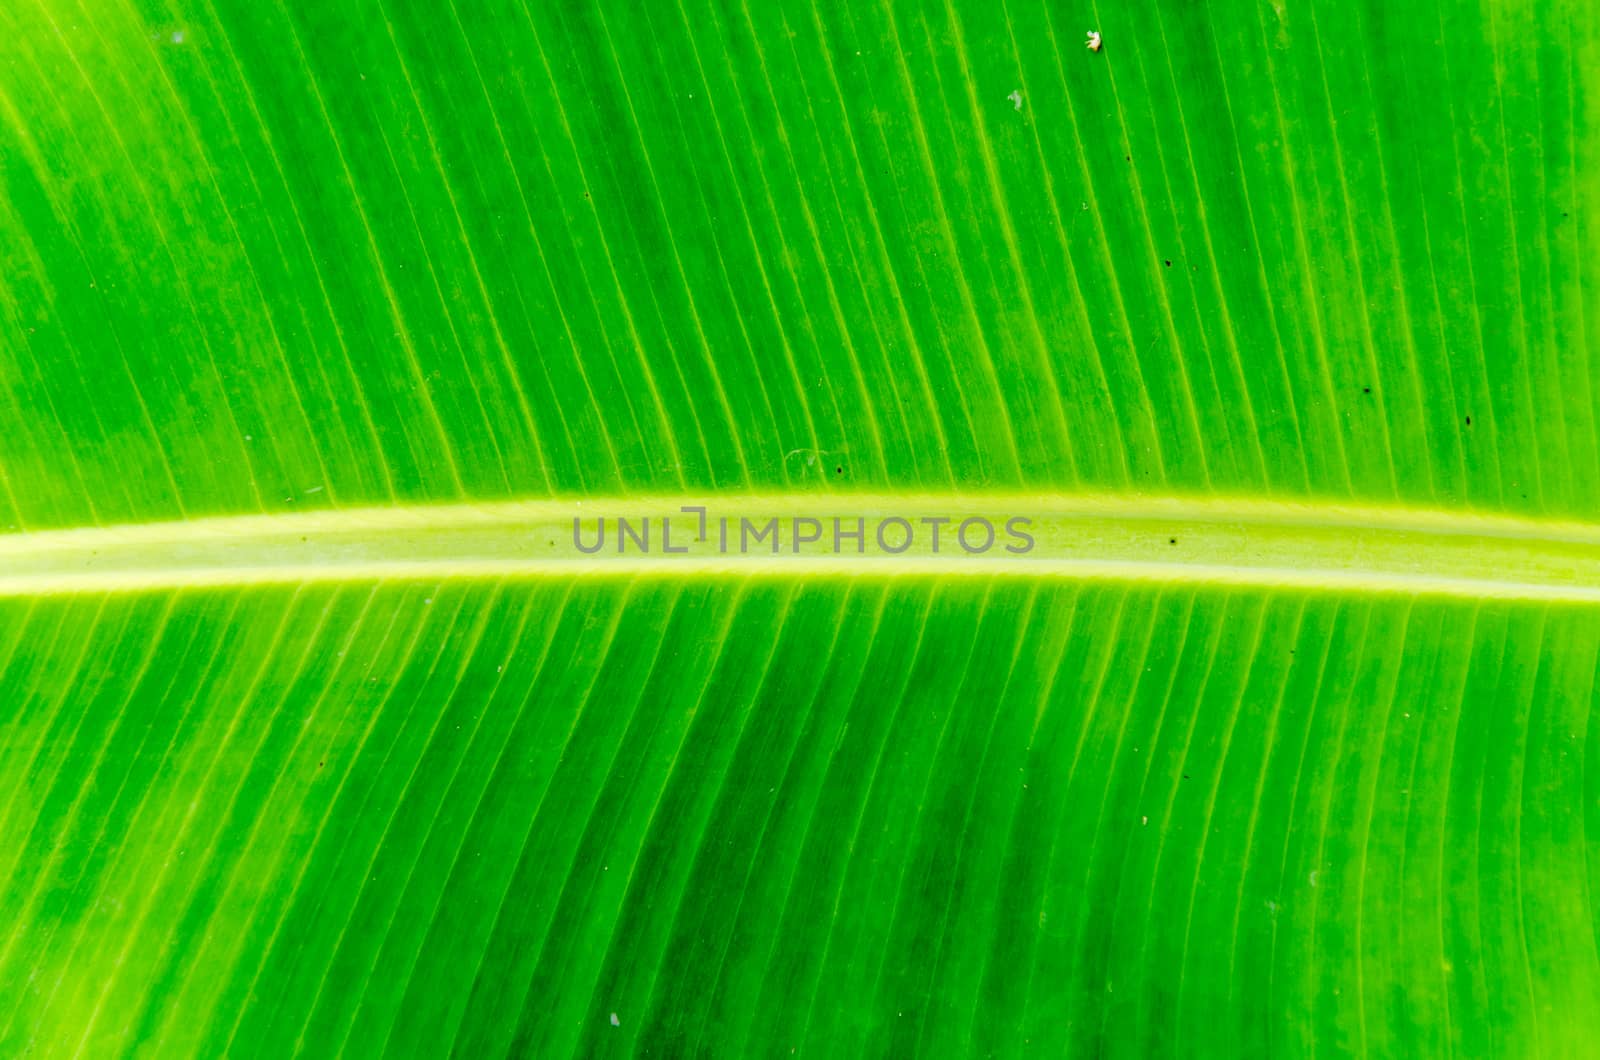 Banana leaf texture and background by gigsuppajit